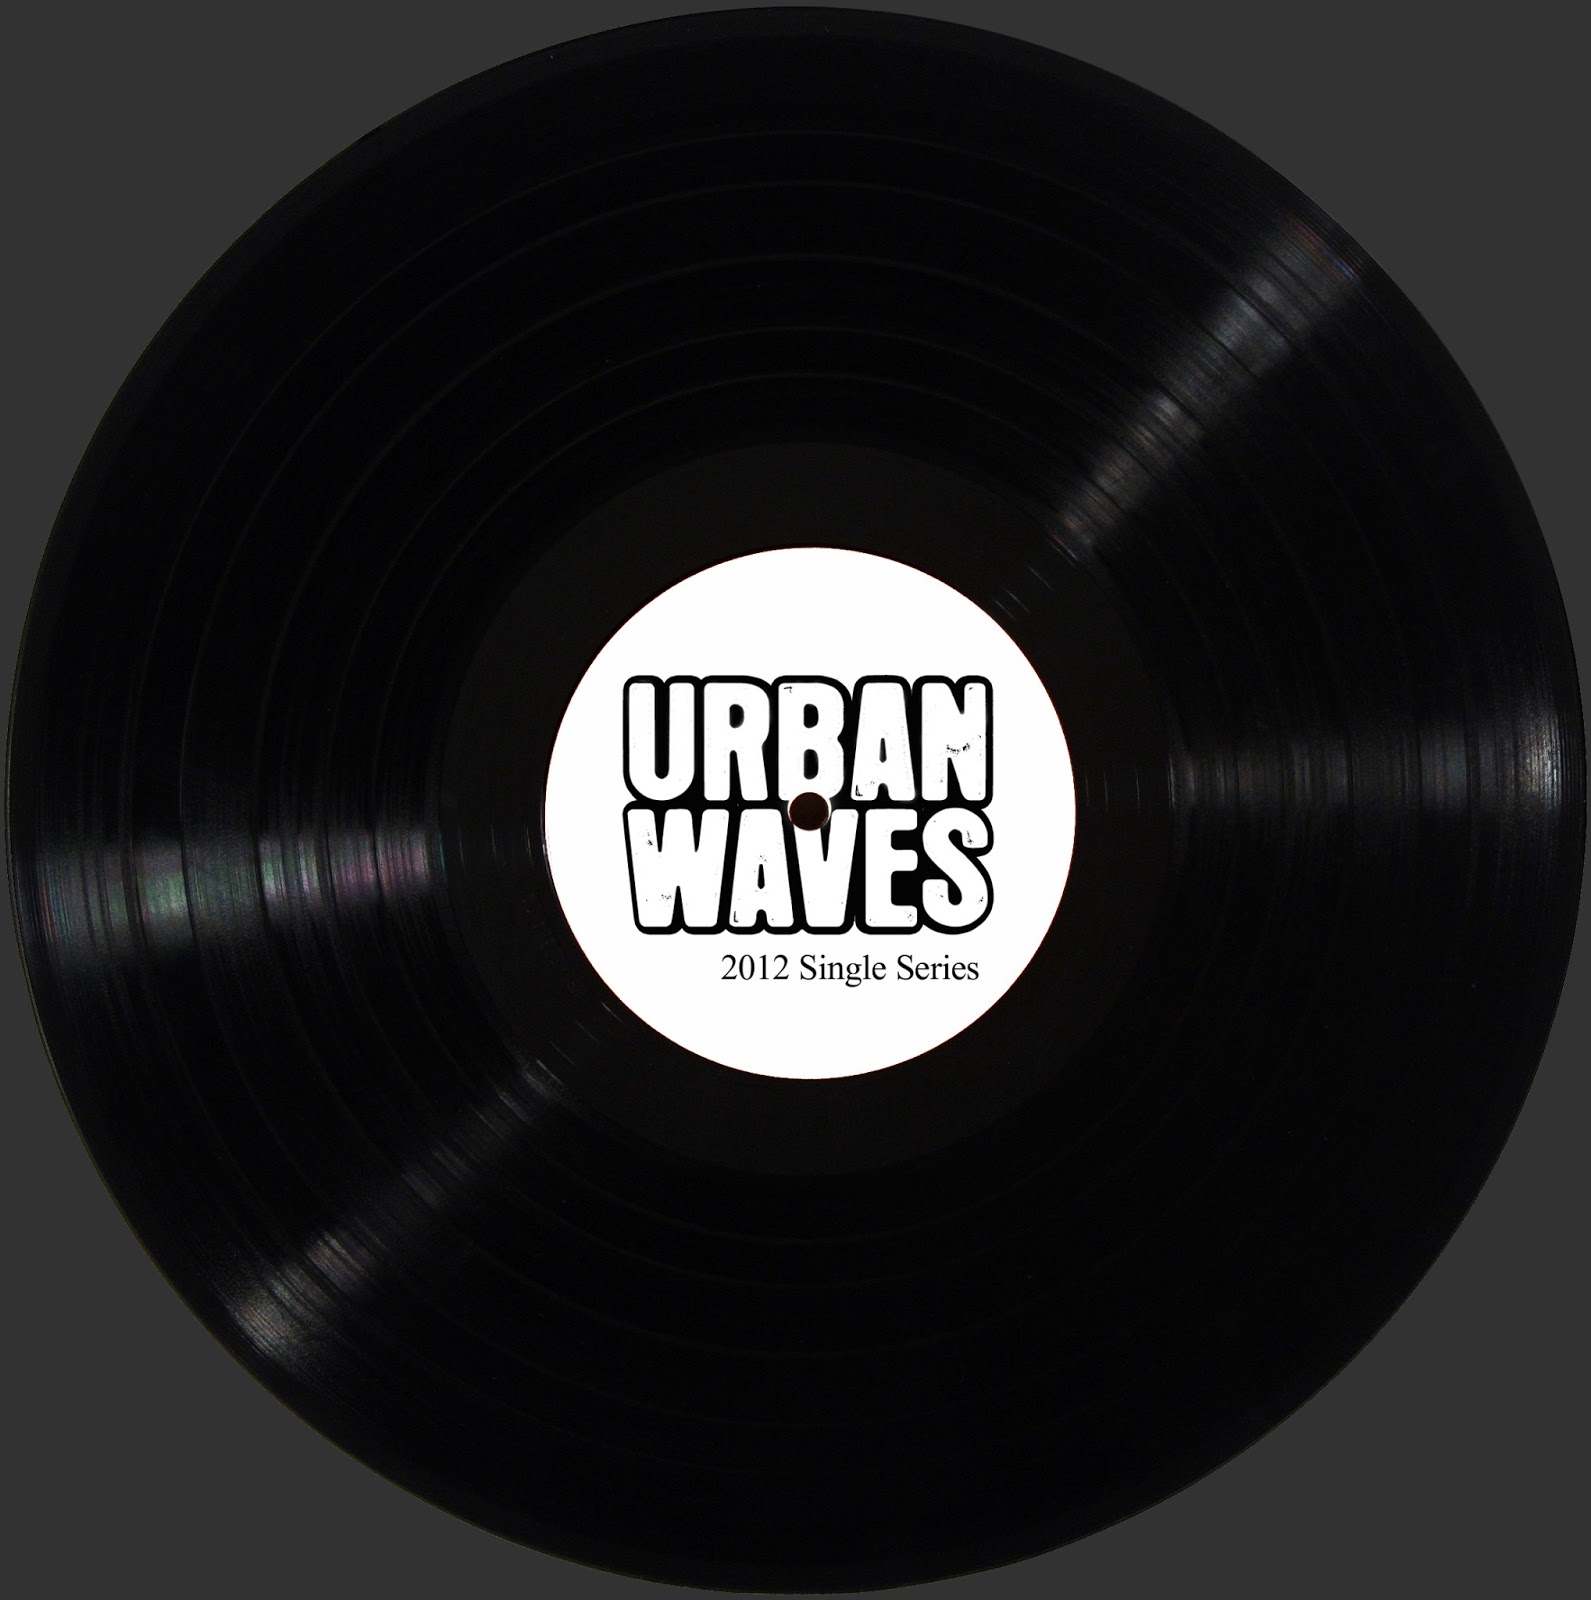 Single series. Lounge Downtempo Chillout Urban. Va - a Beats, Rhymes & Lex decade.